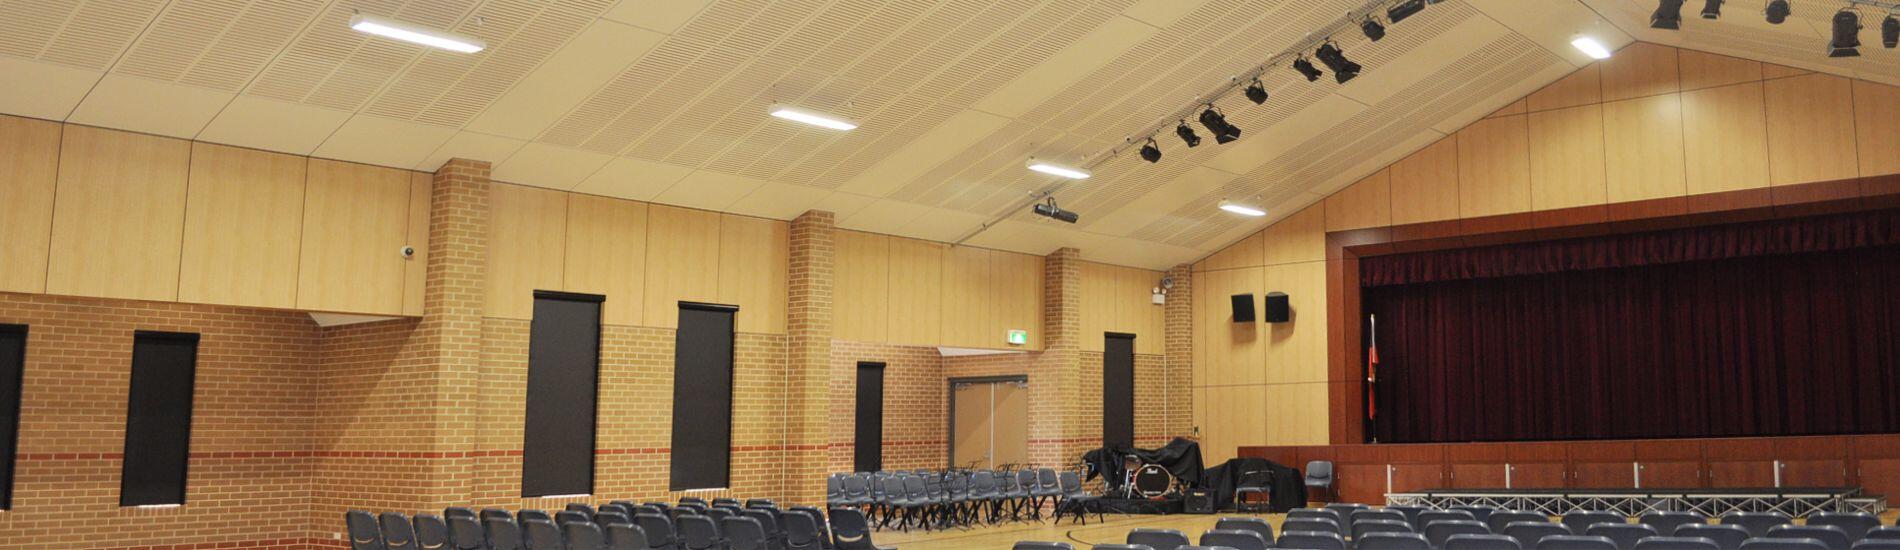 SUPACOUSTIC and SUPALINE panels in mixed finishes a durable acoustic solution for school hall